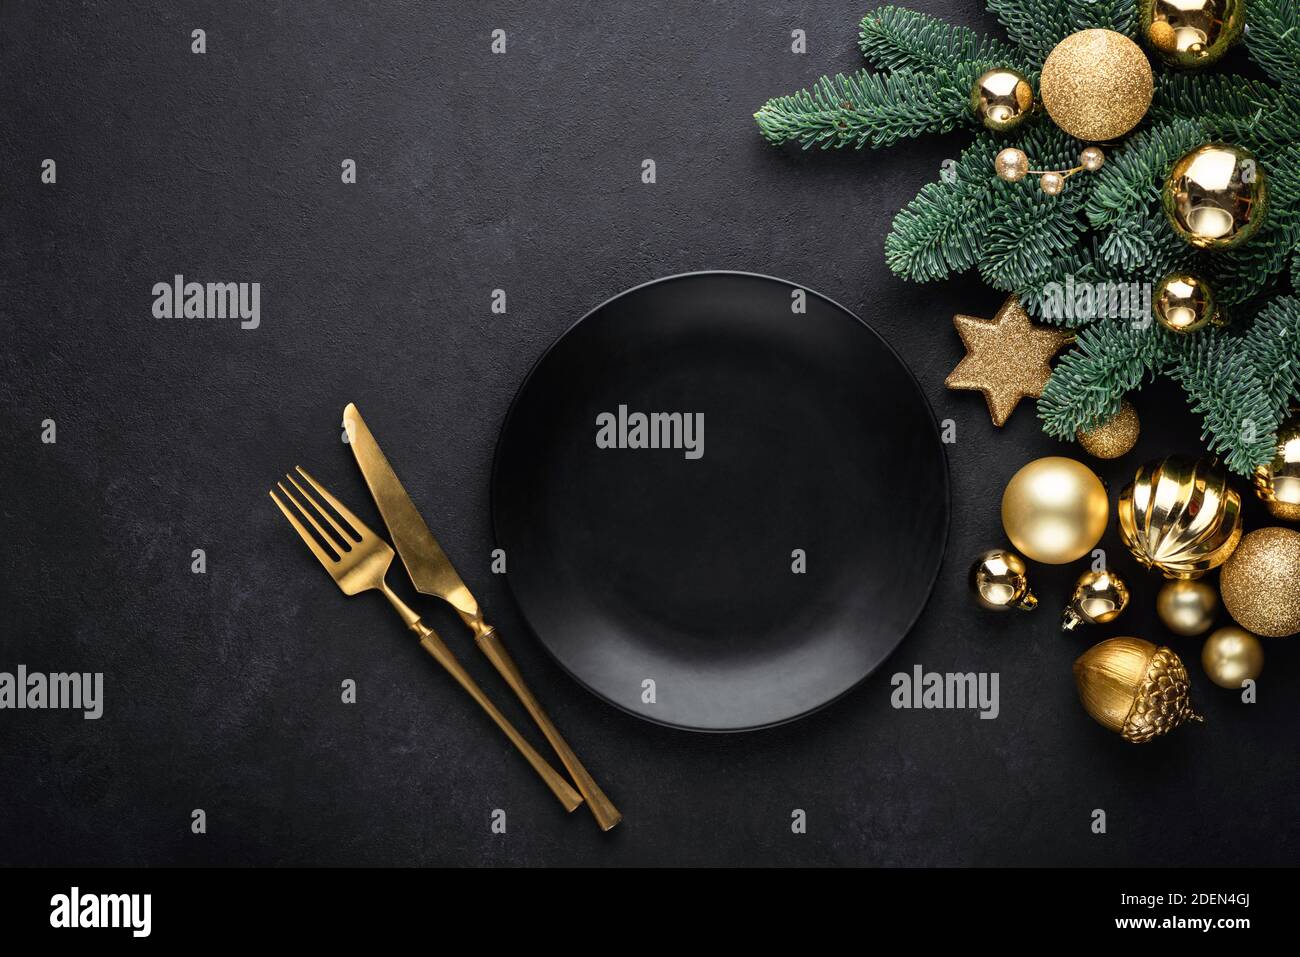 Christmas flat lay background with empty black plate, golden cutlery, christmas tree and toys. Top view, copy space. Trendy fashionable black theme Ch Stock Photo